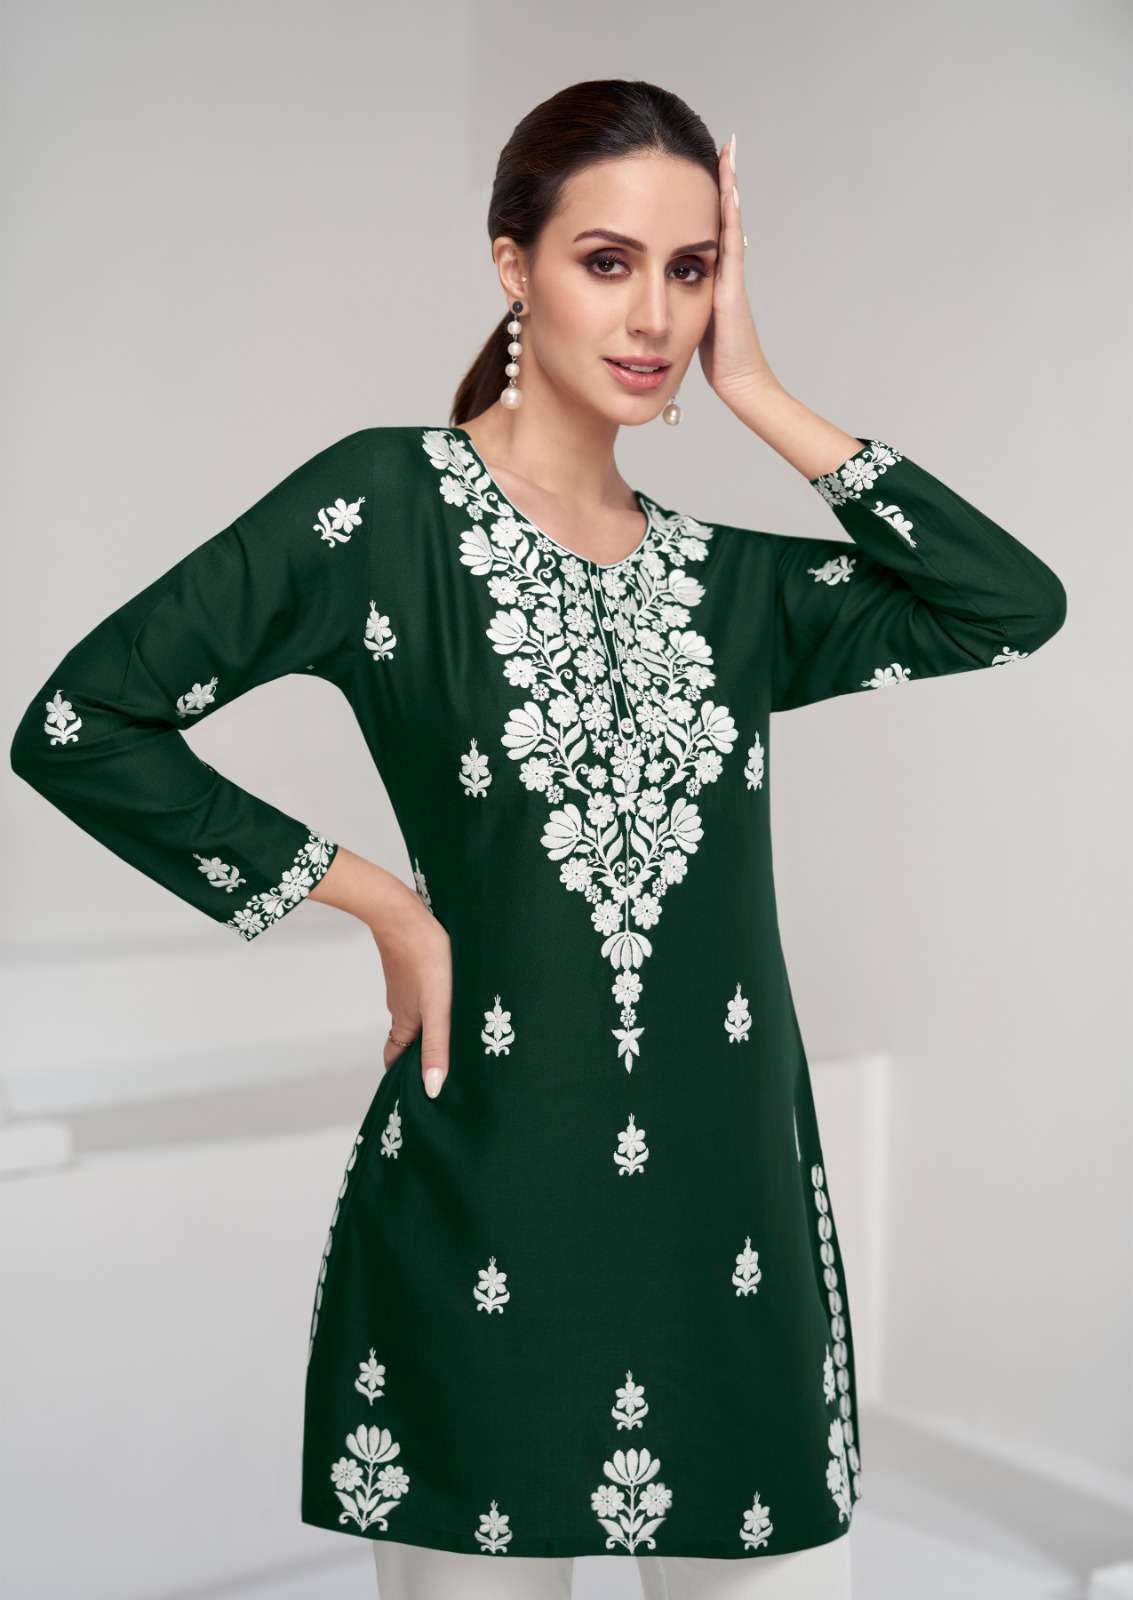 vamika nx new launch we are providing new range of tunic collection incorporate minimalistic styles into your ethnic yet modern line-up with this elegant designer tunics short top catalogue name ruhana